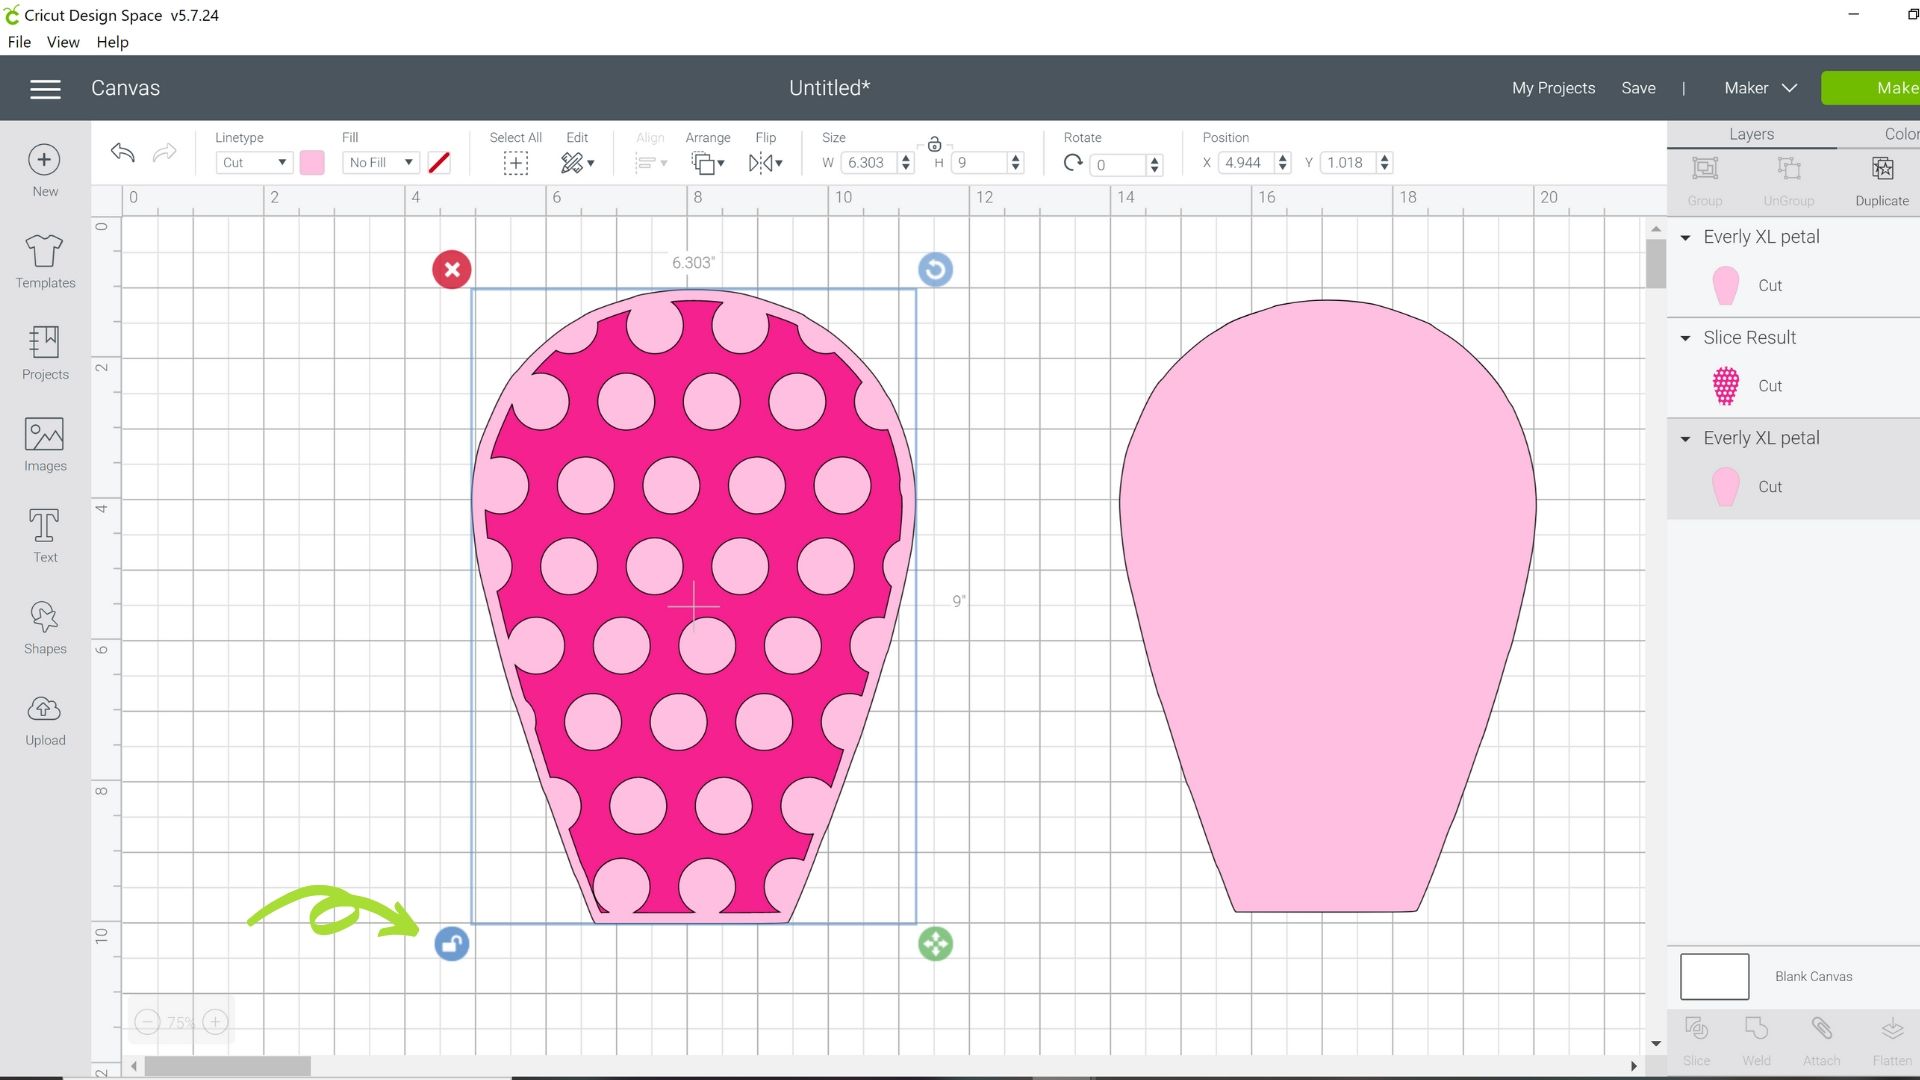 A Design Space screenshot showing two flower petal designs stacked on top of each other - a darker pink polka dot petal stacked onto a light pink petal.